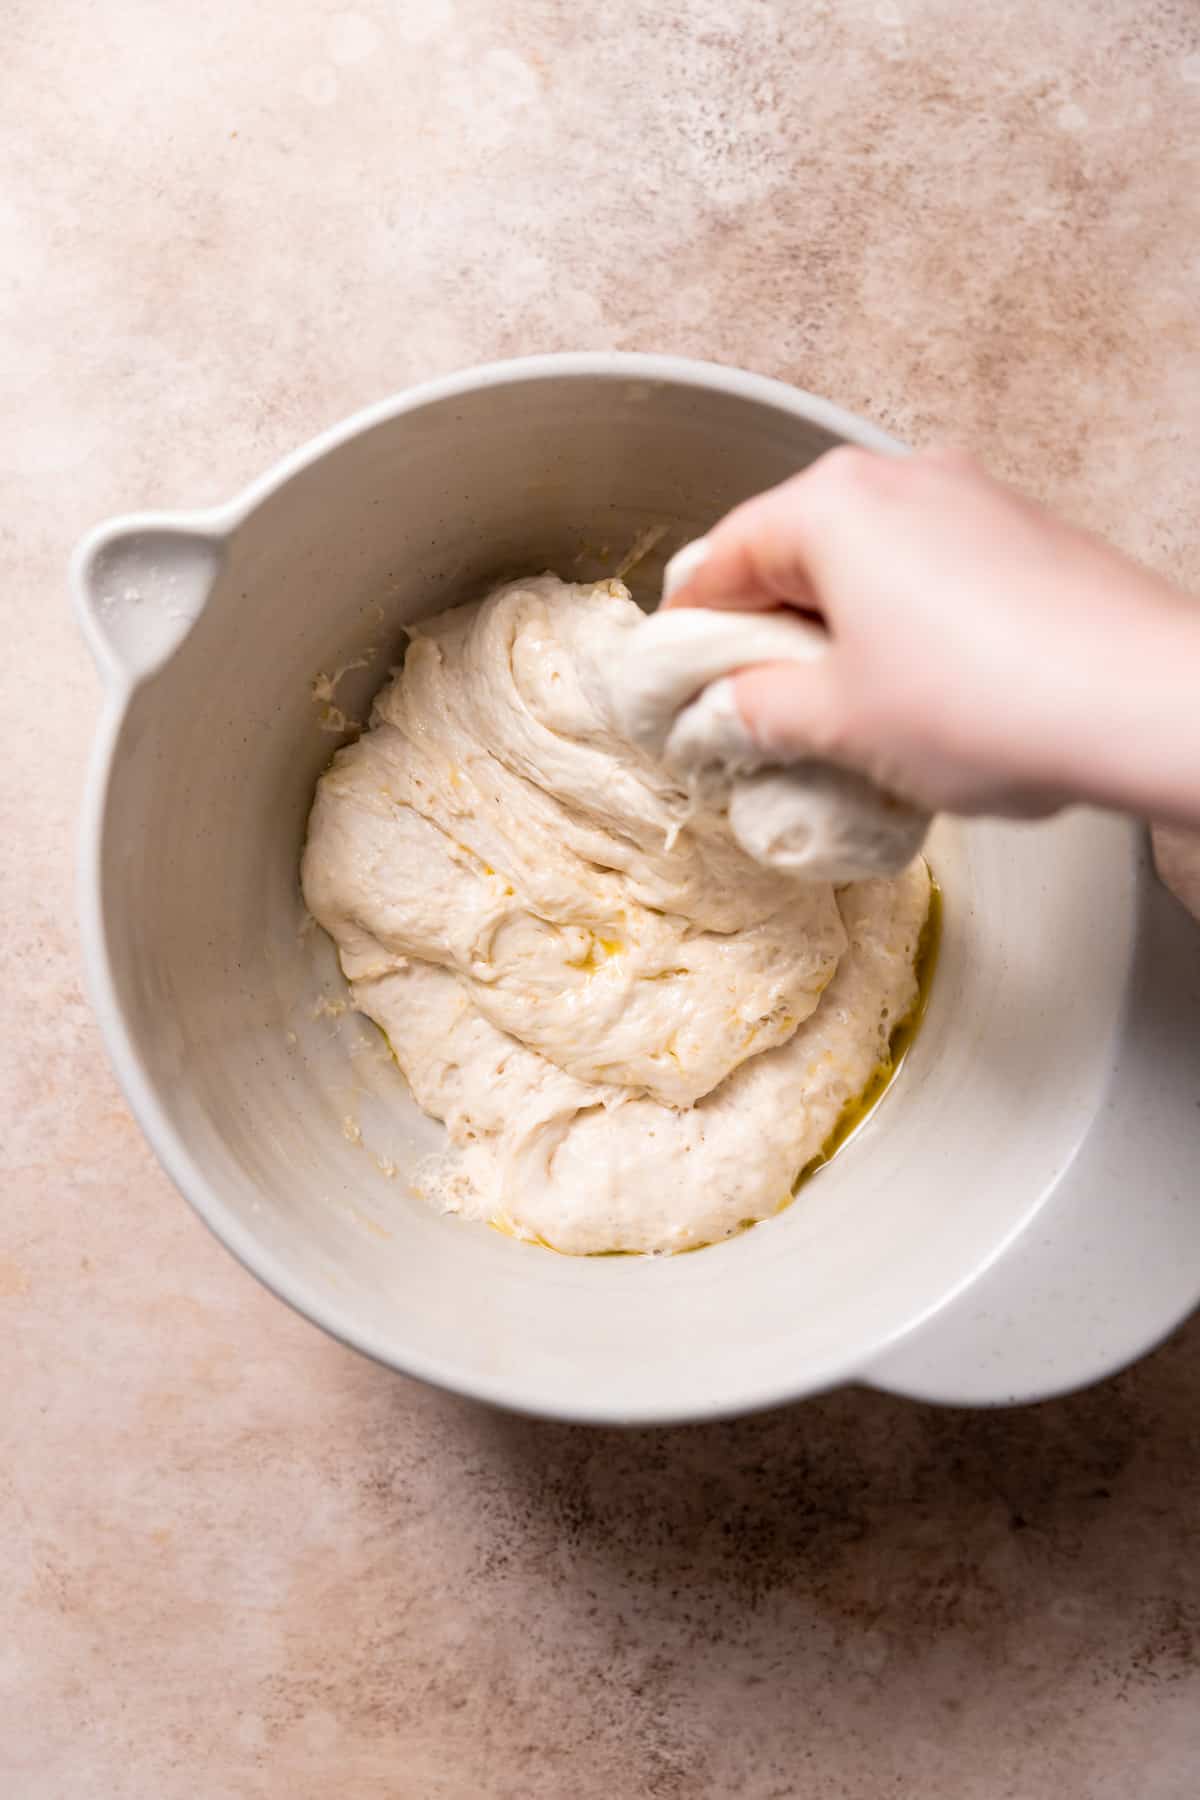 a hand stretching and folding the focaccia dough in a bowl.